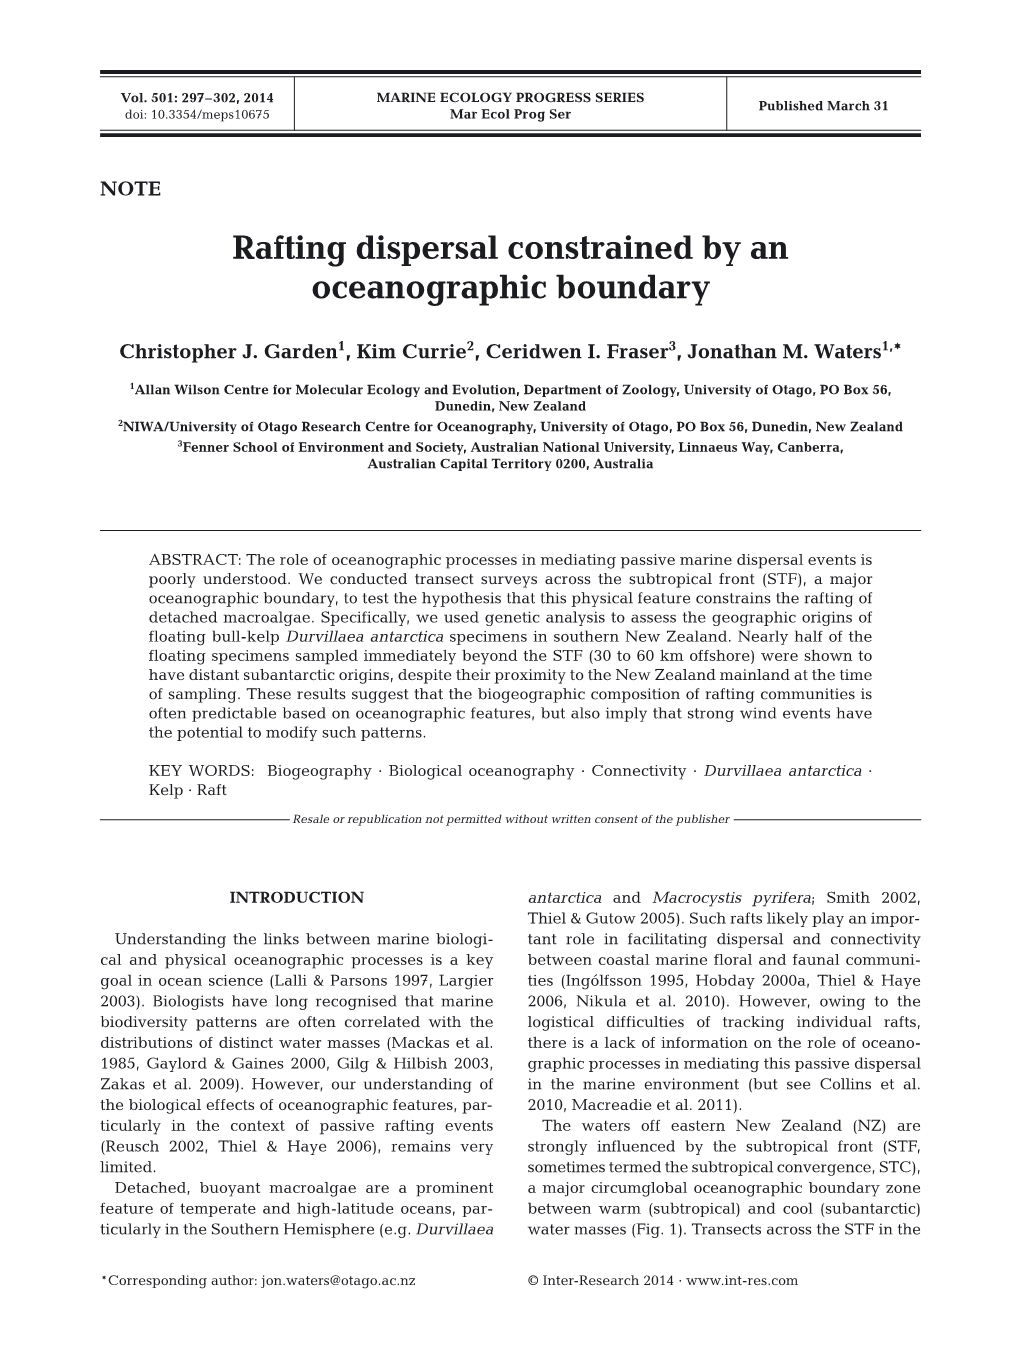 Rafting Dispersal Constrained by an Oceanographic Boundary